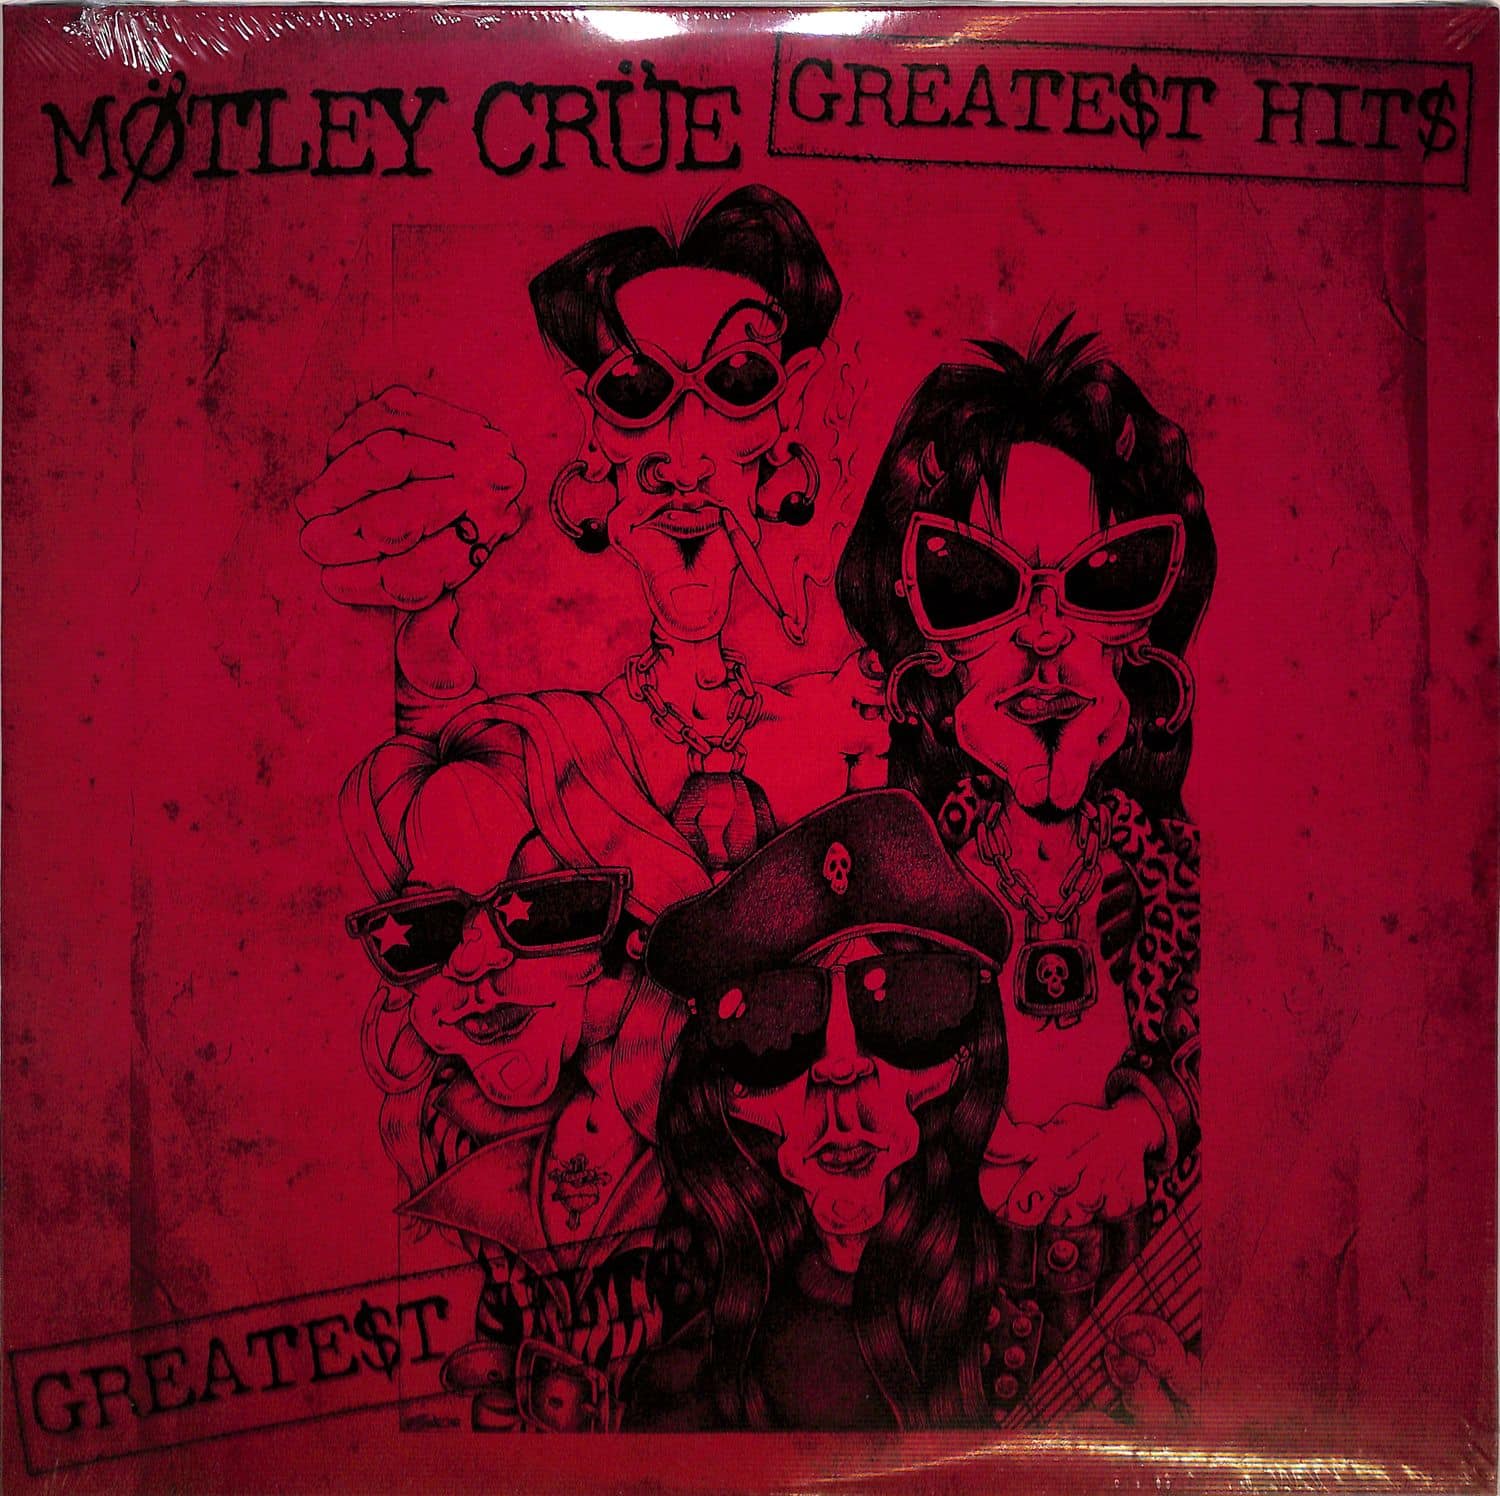 Mtley Cre - THE GREATEST HITS 